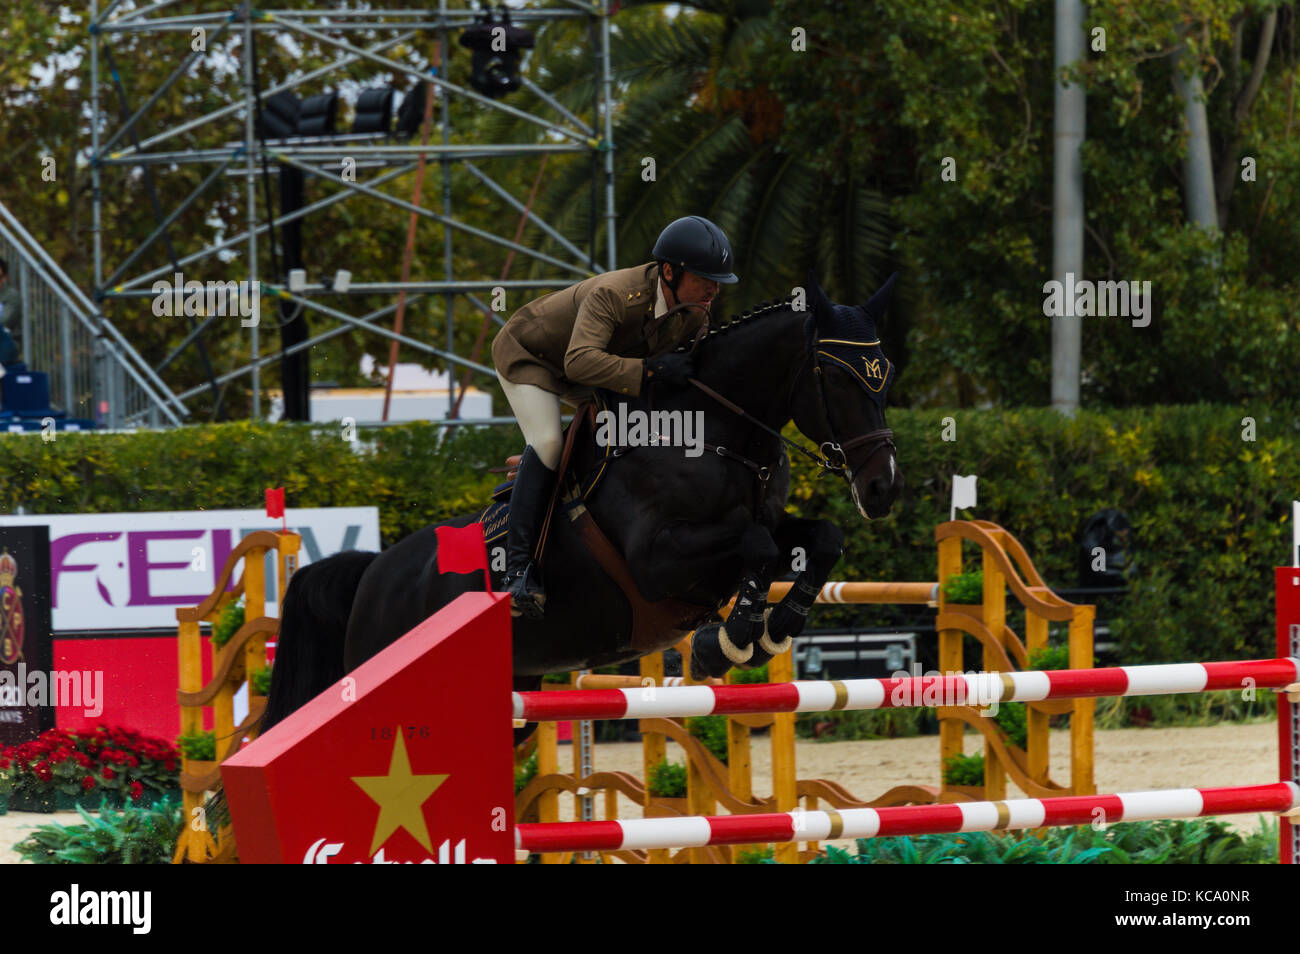 Longines FEI nations cup jumping final, Barcelona Stock Photo